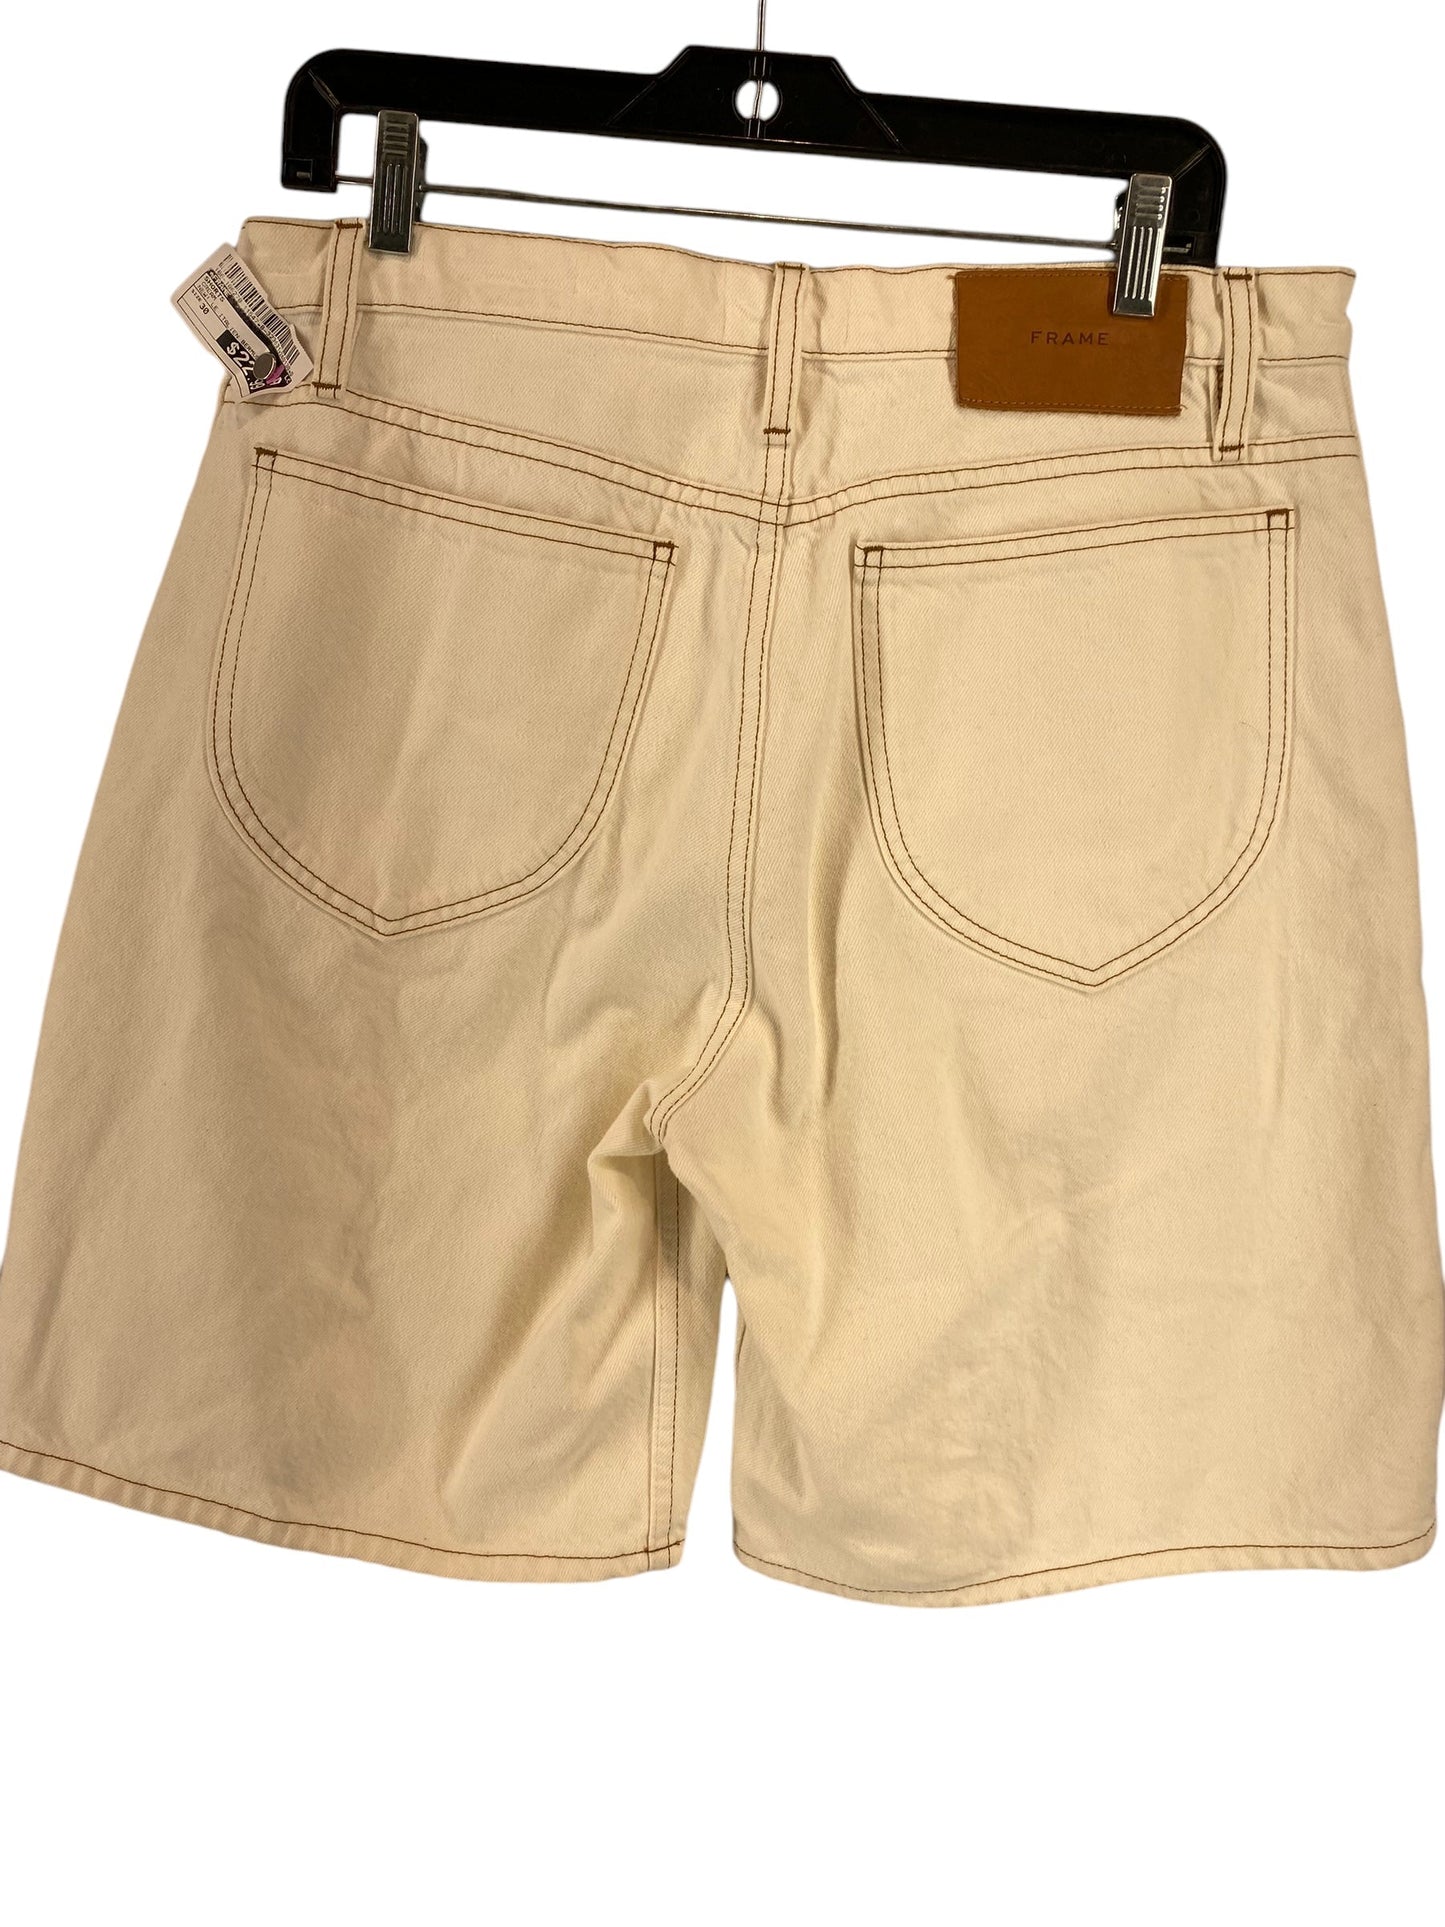 Shorts By Frame  Size: 30